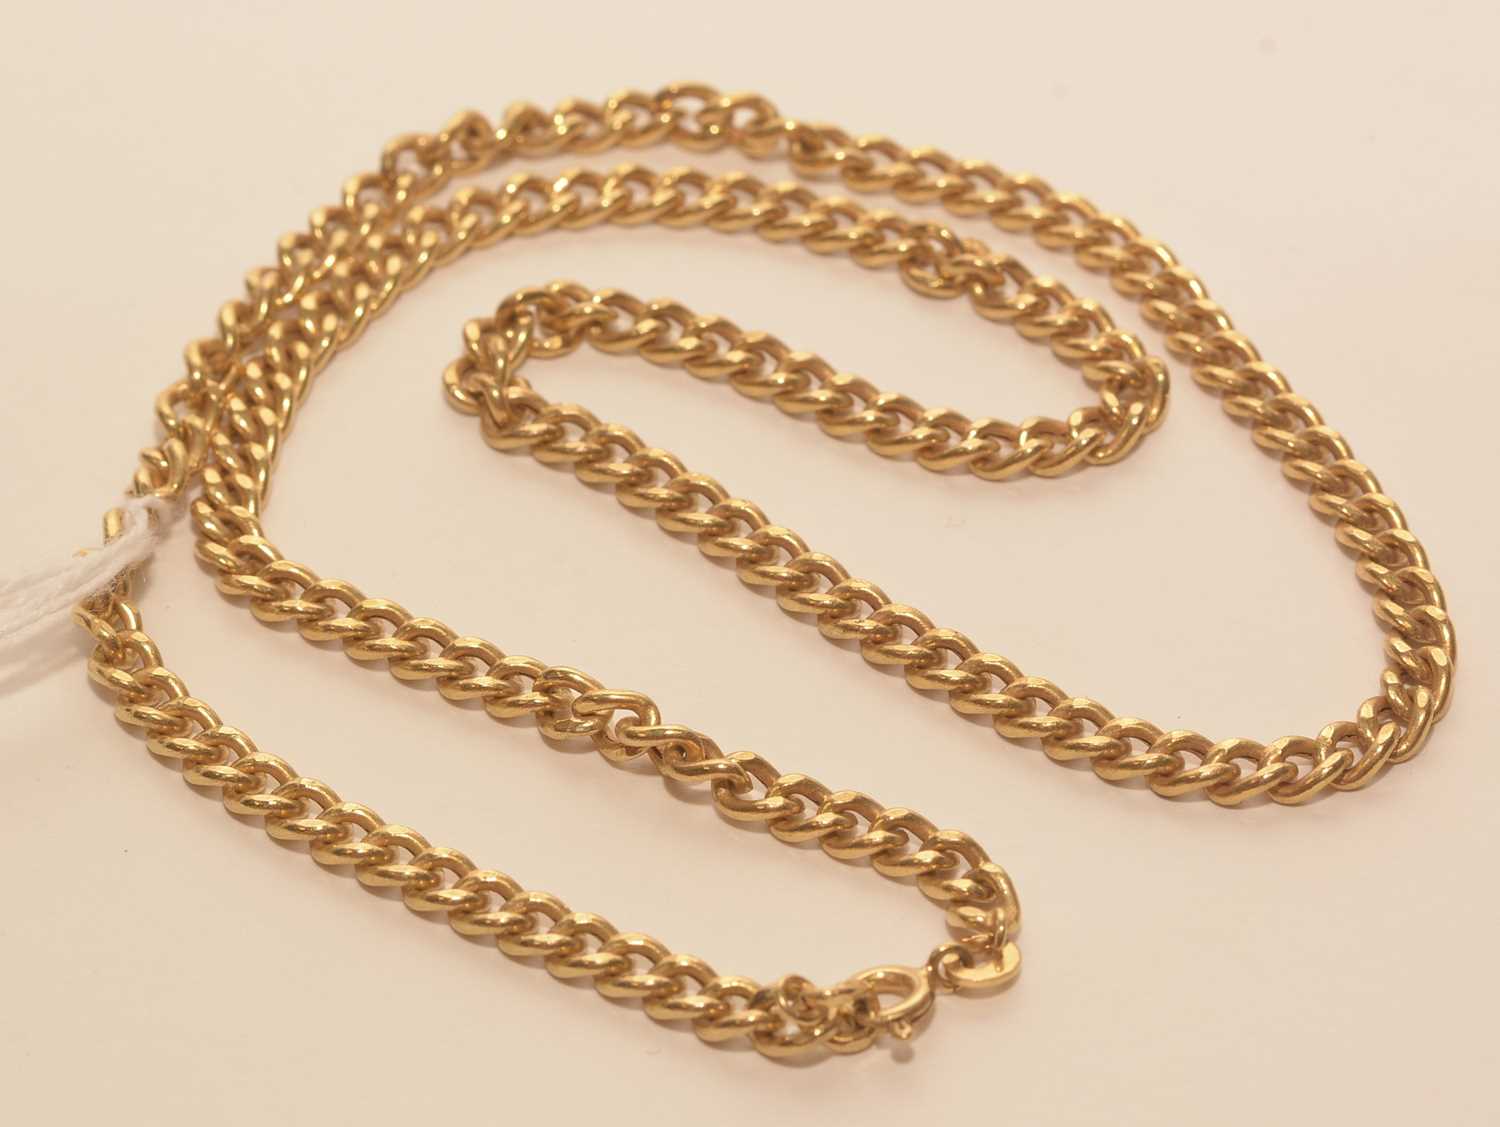 Lot 205 - 9ct yellow gold chain necklace